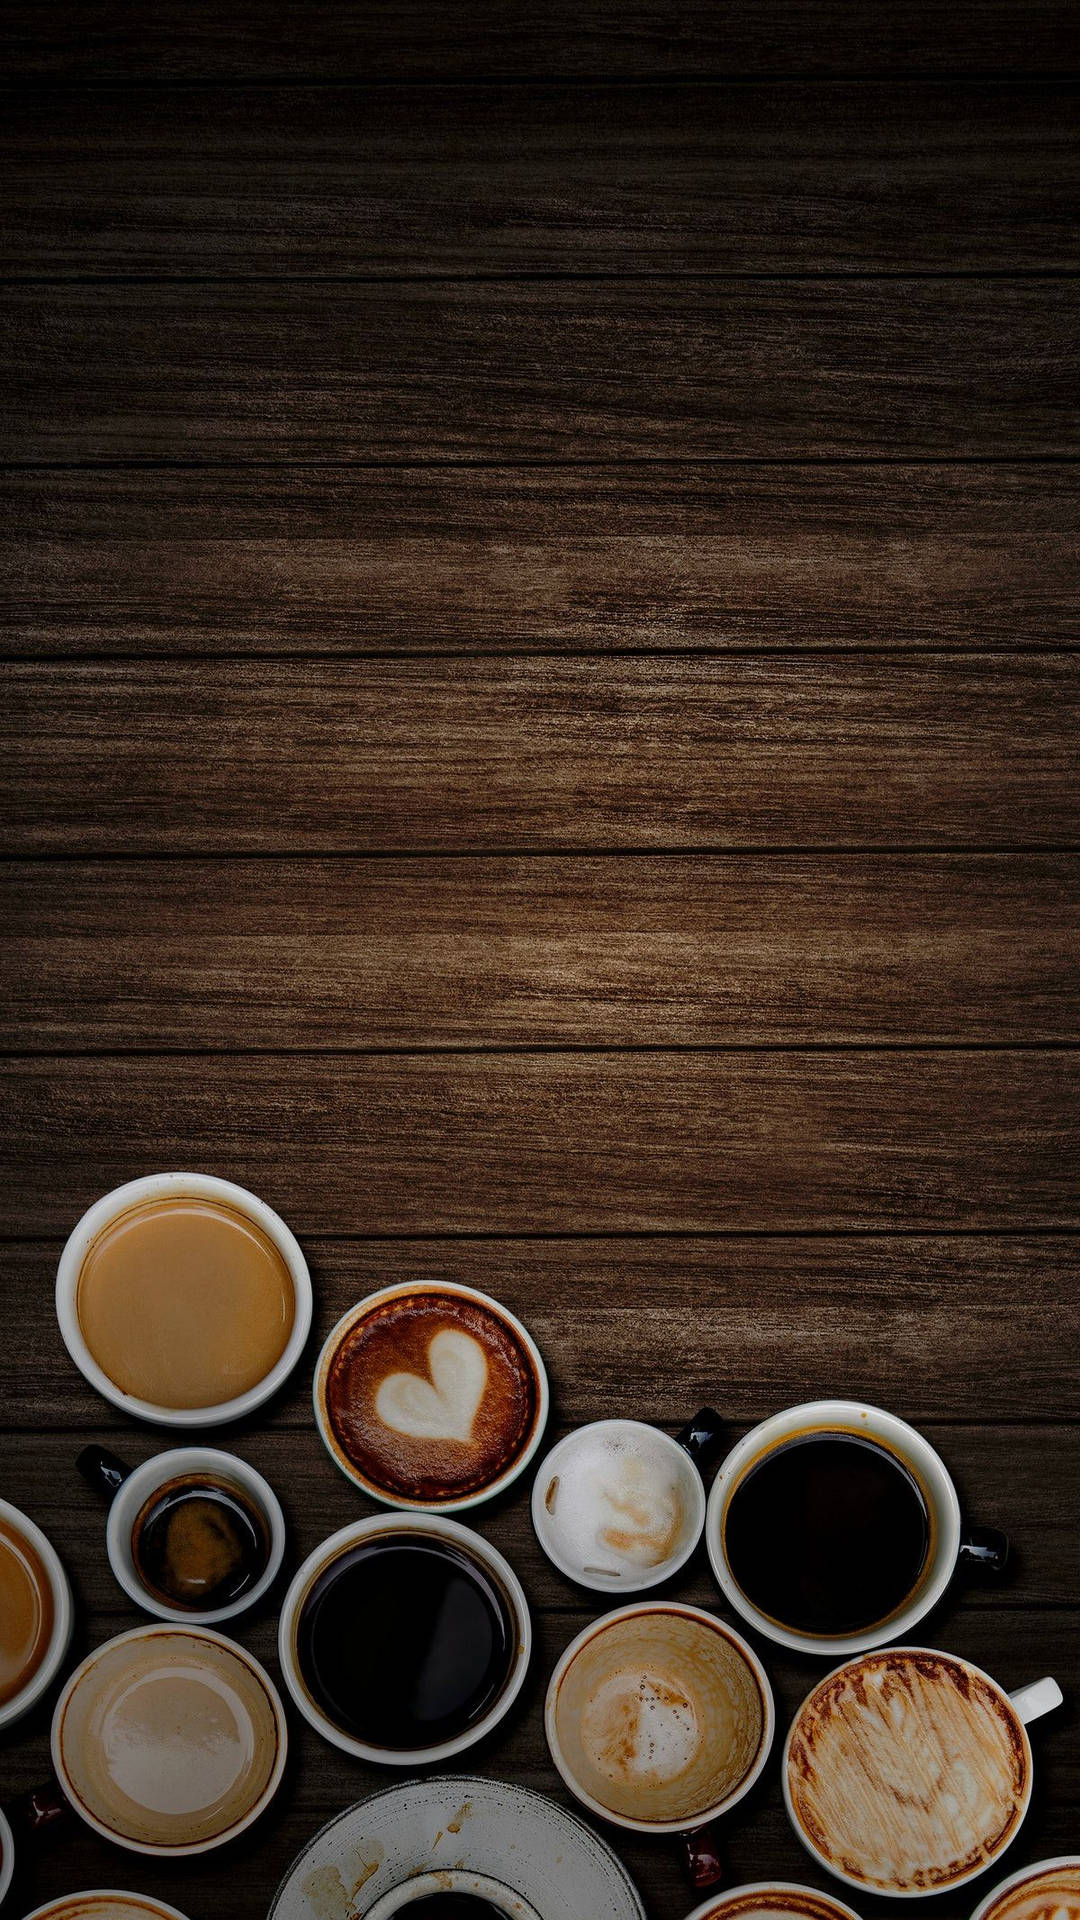 1080x1920 wallpaper.<ref> Multiple coffee cups</ref><box>(5,607),(993,996)</box> on a wooden table - Coffee